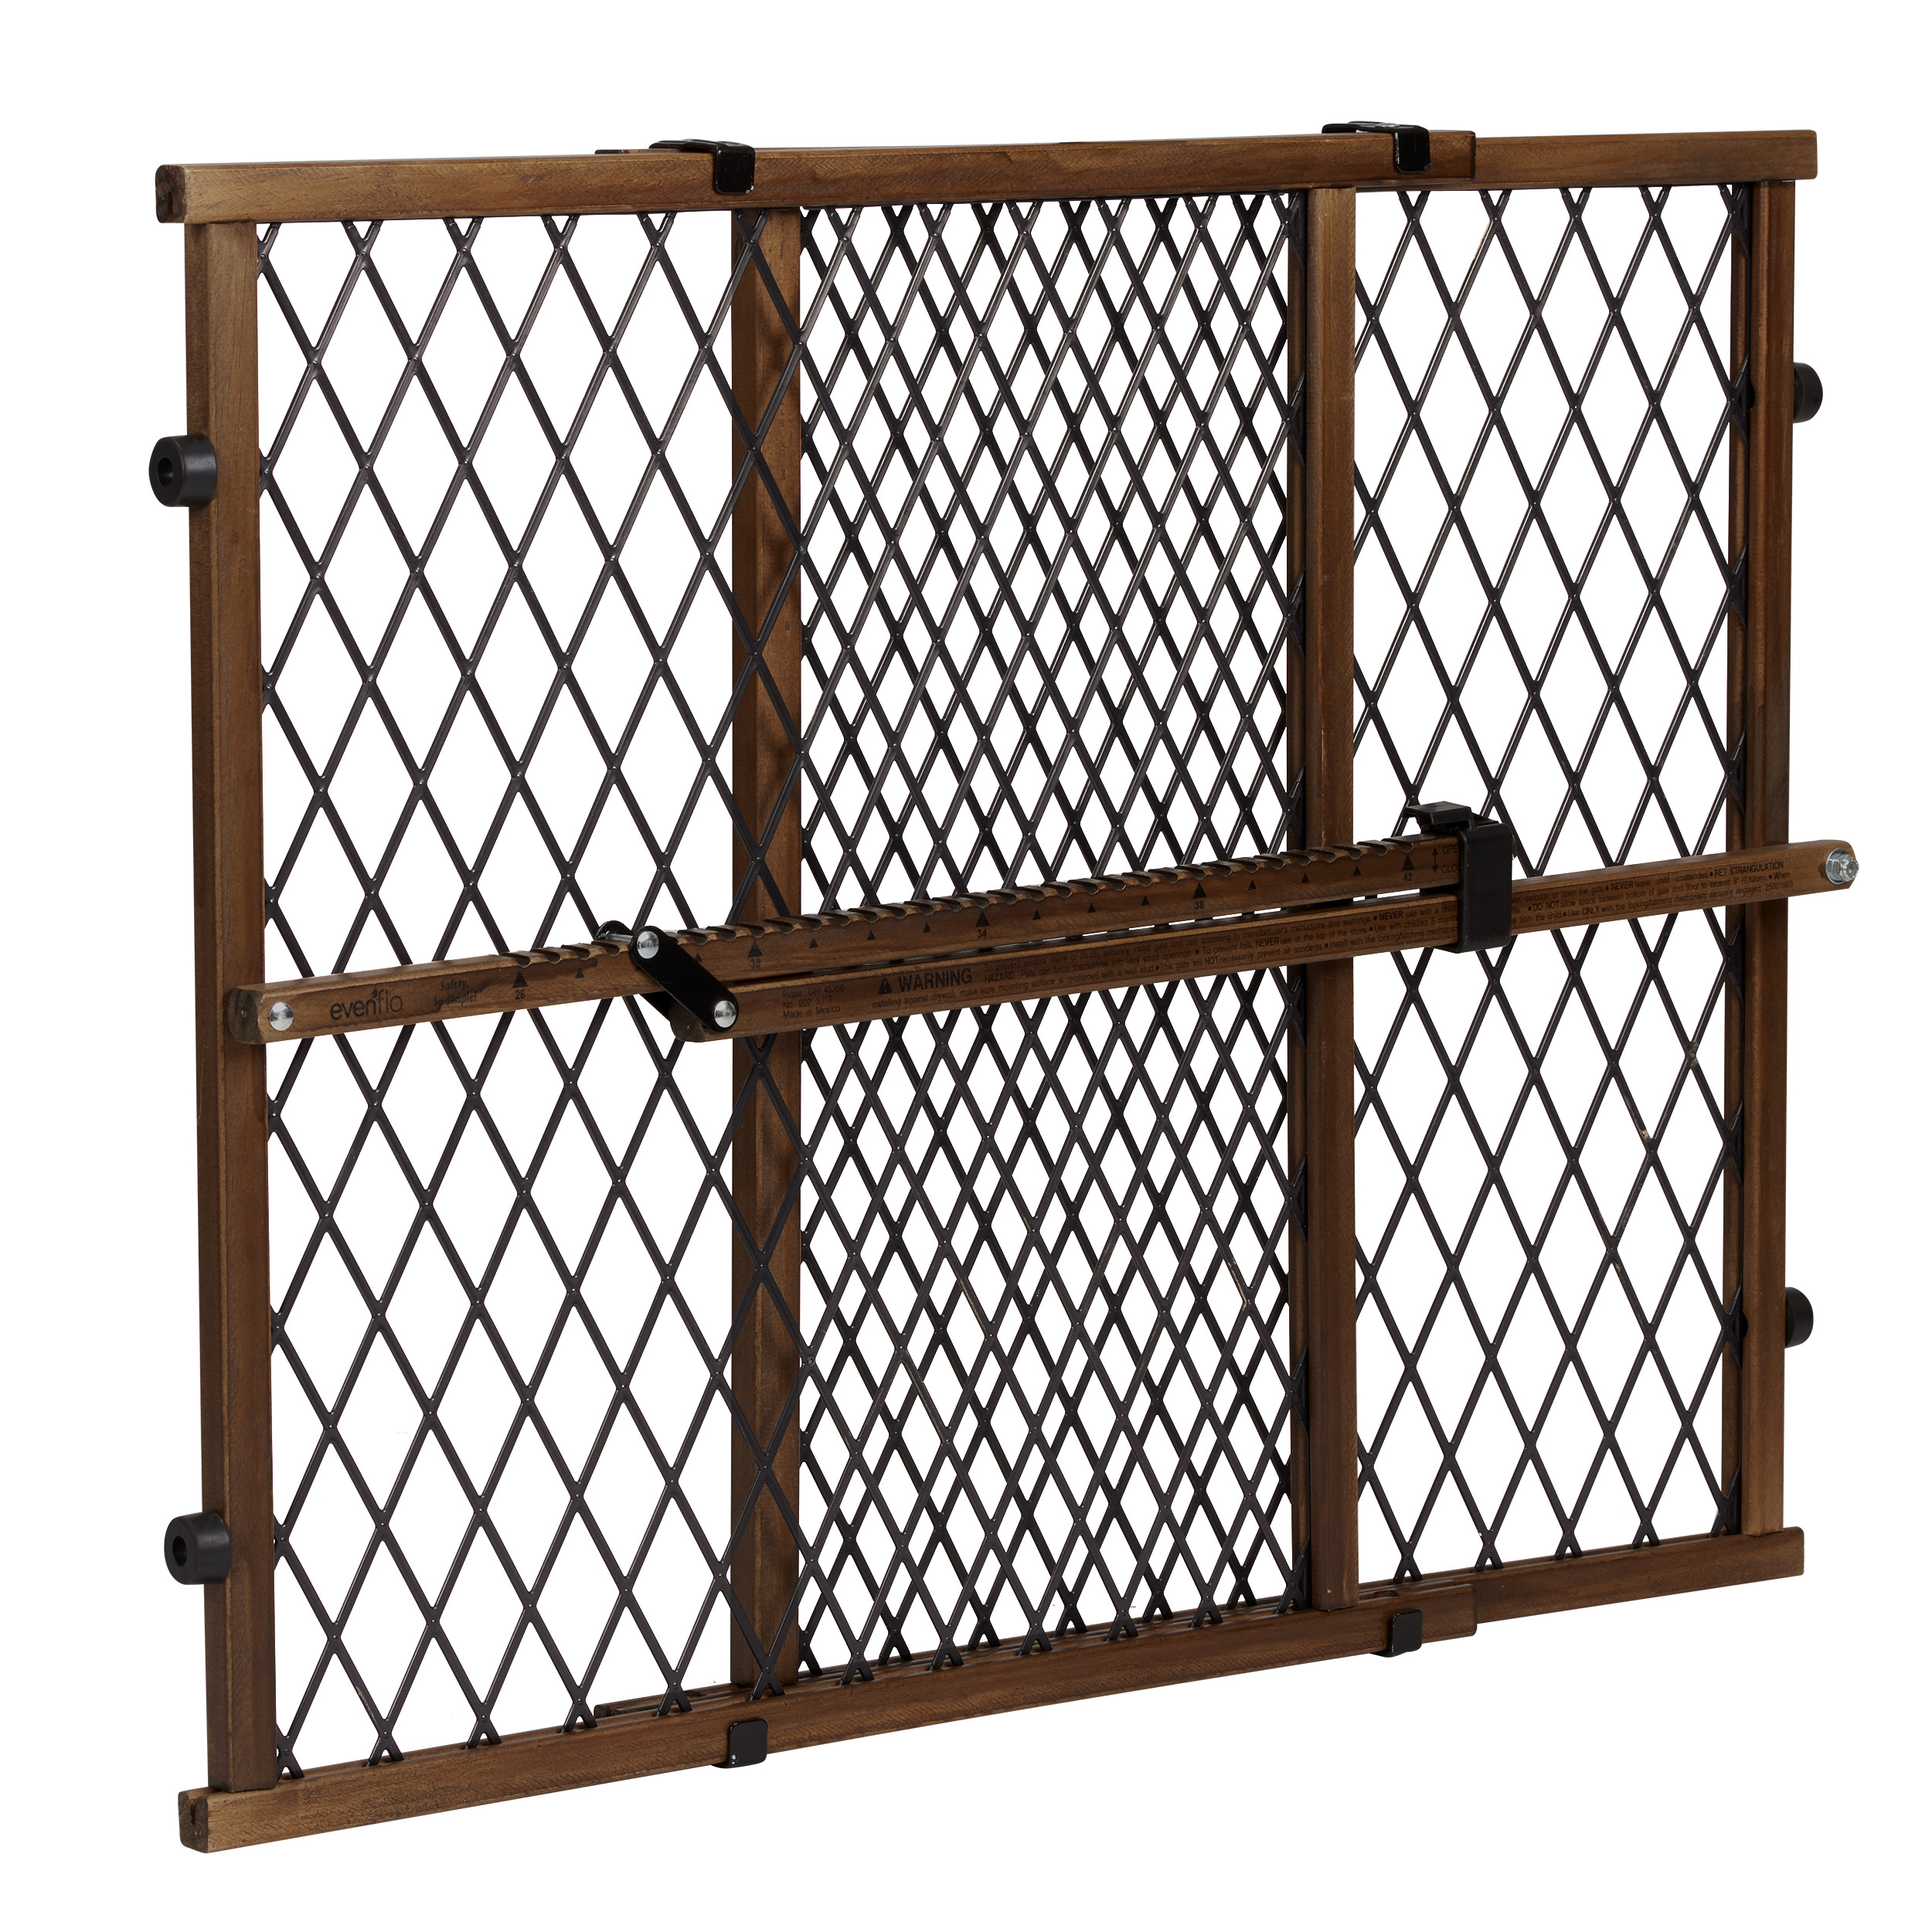 Evenflo Position & Lock Adjustable Wood Baby Gate,, Infant, Toddler & Pets, 26"-42", Farmhouse Brown - image 5 of 11